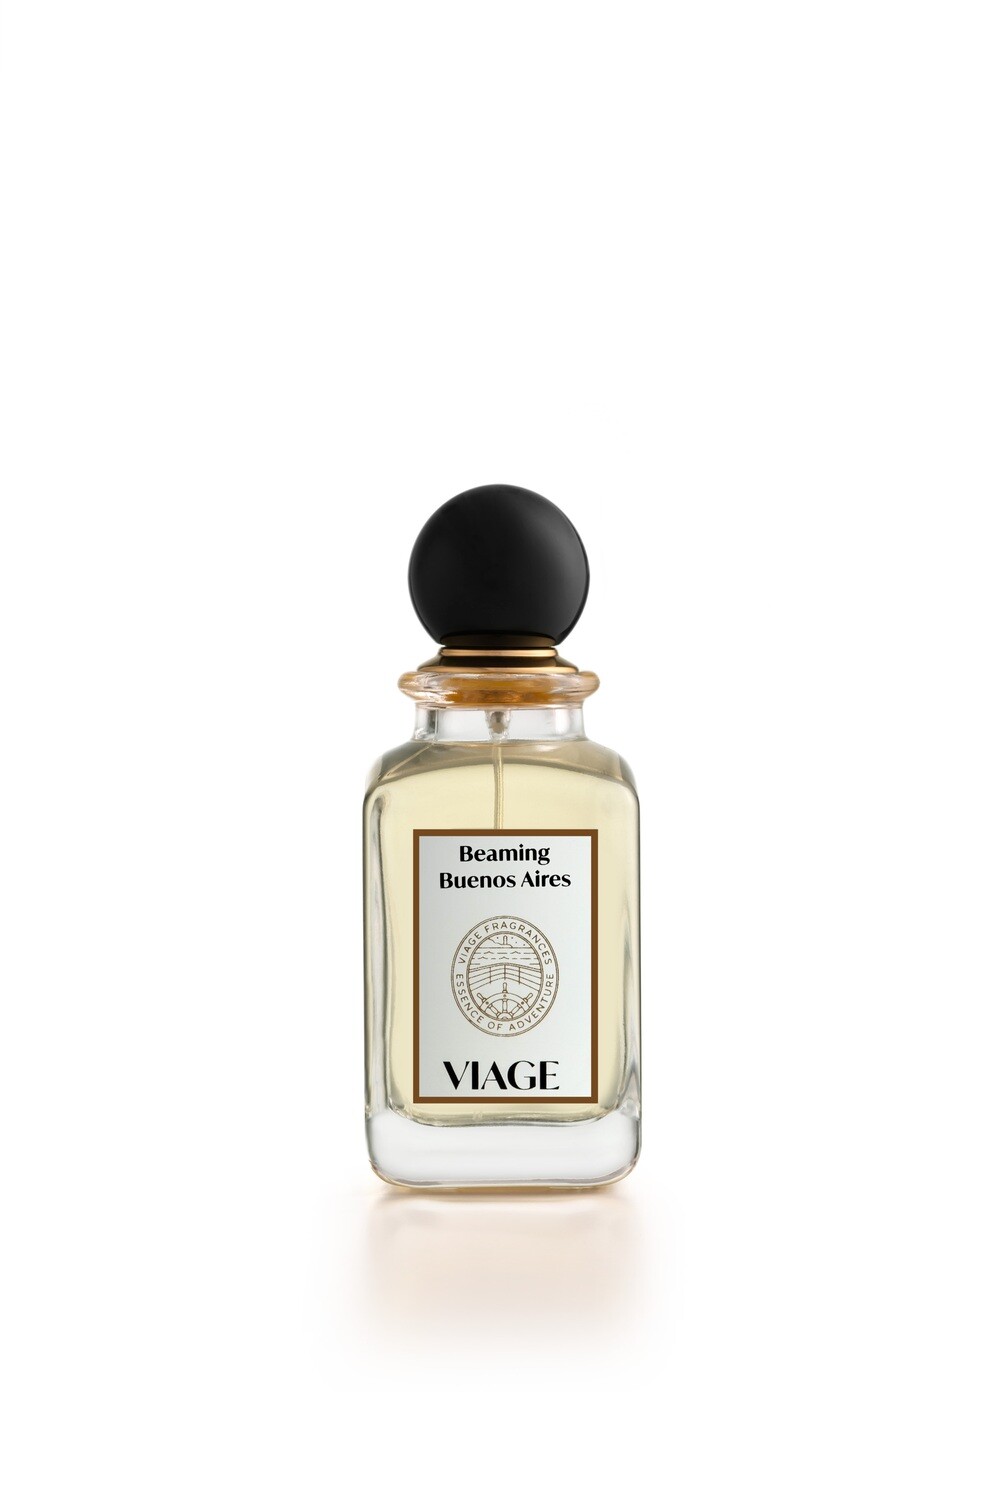 BEAMING BUENOS AIRES - Viage - 100ml Extrait / 1ml